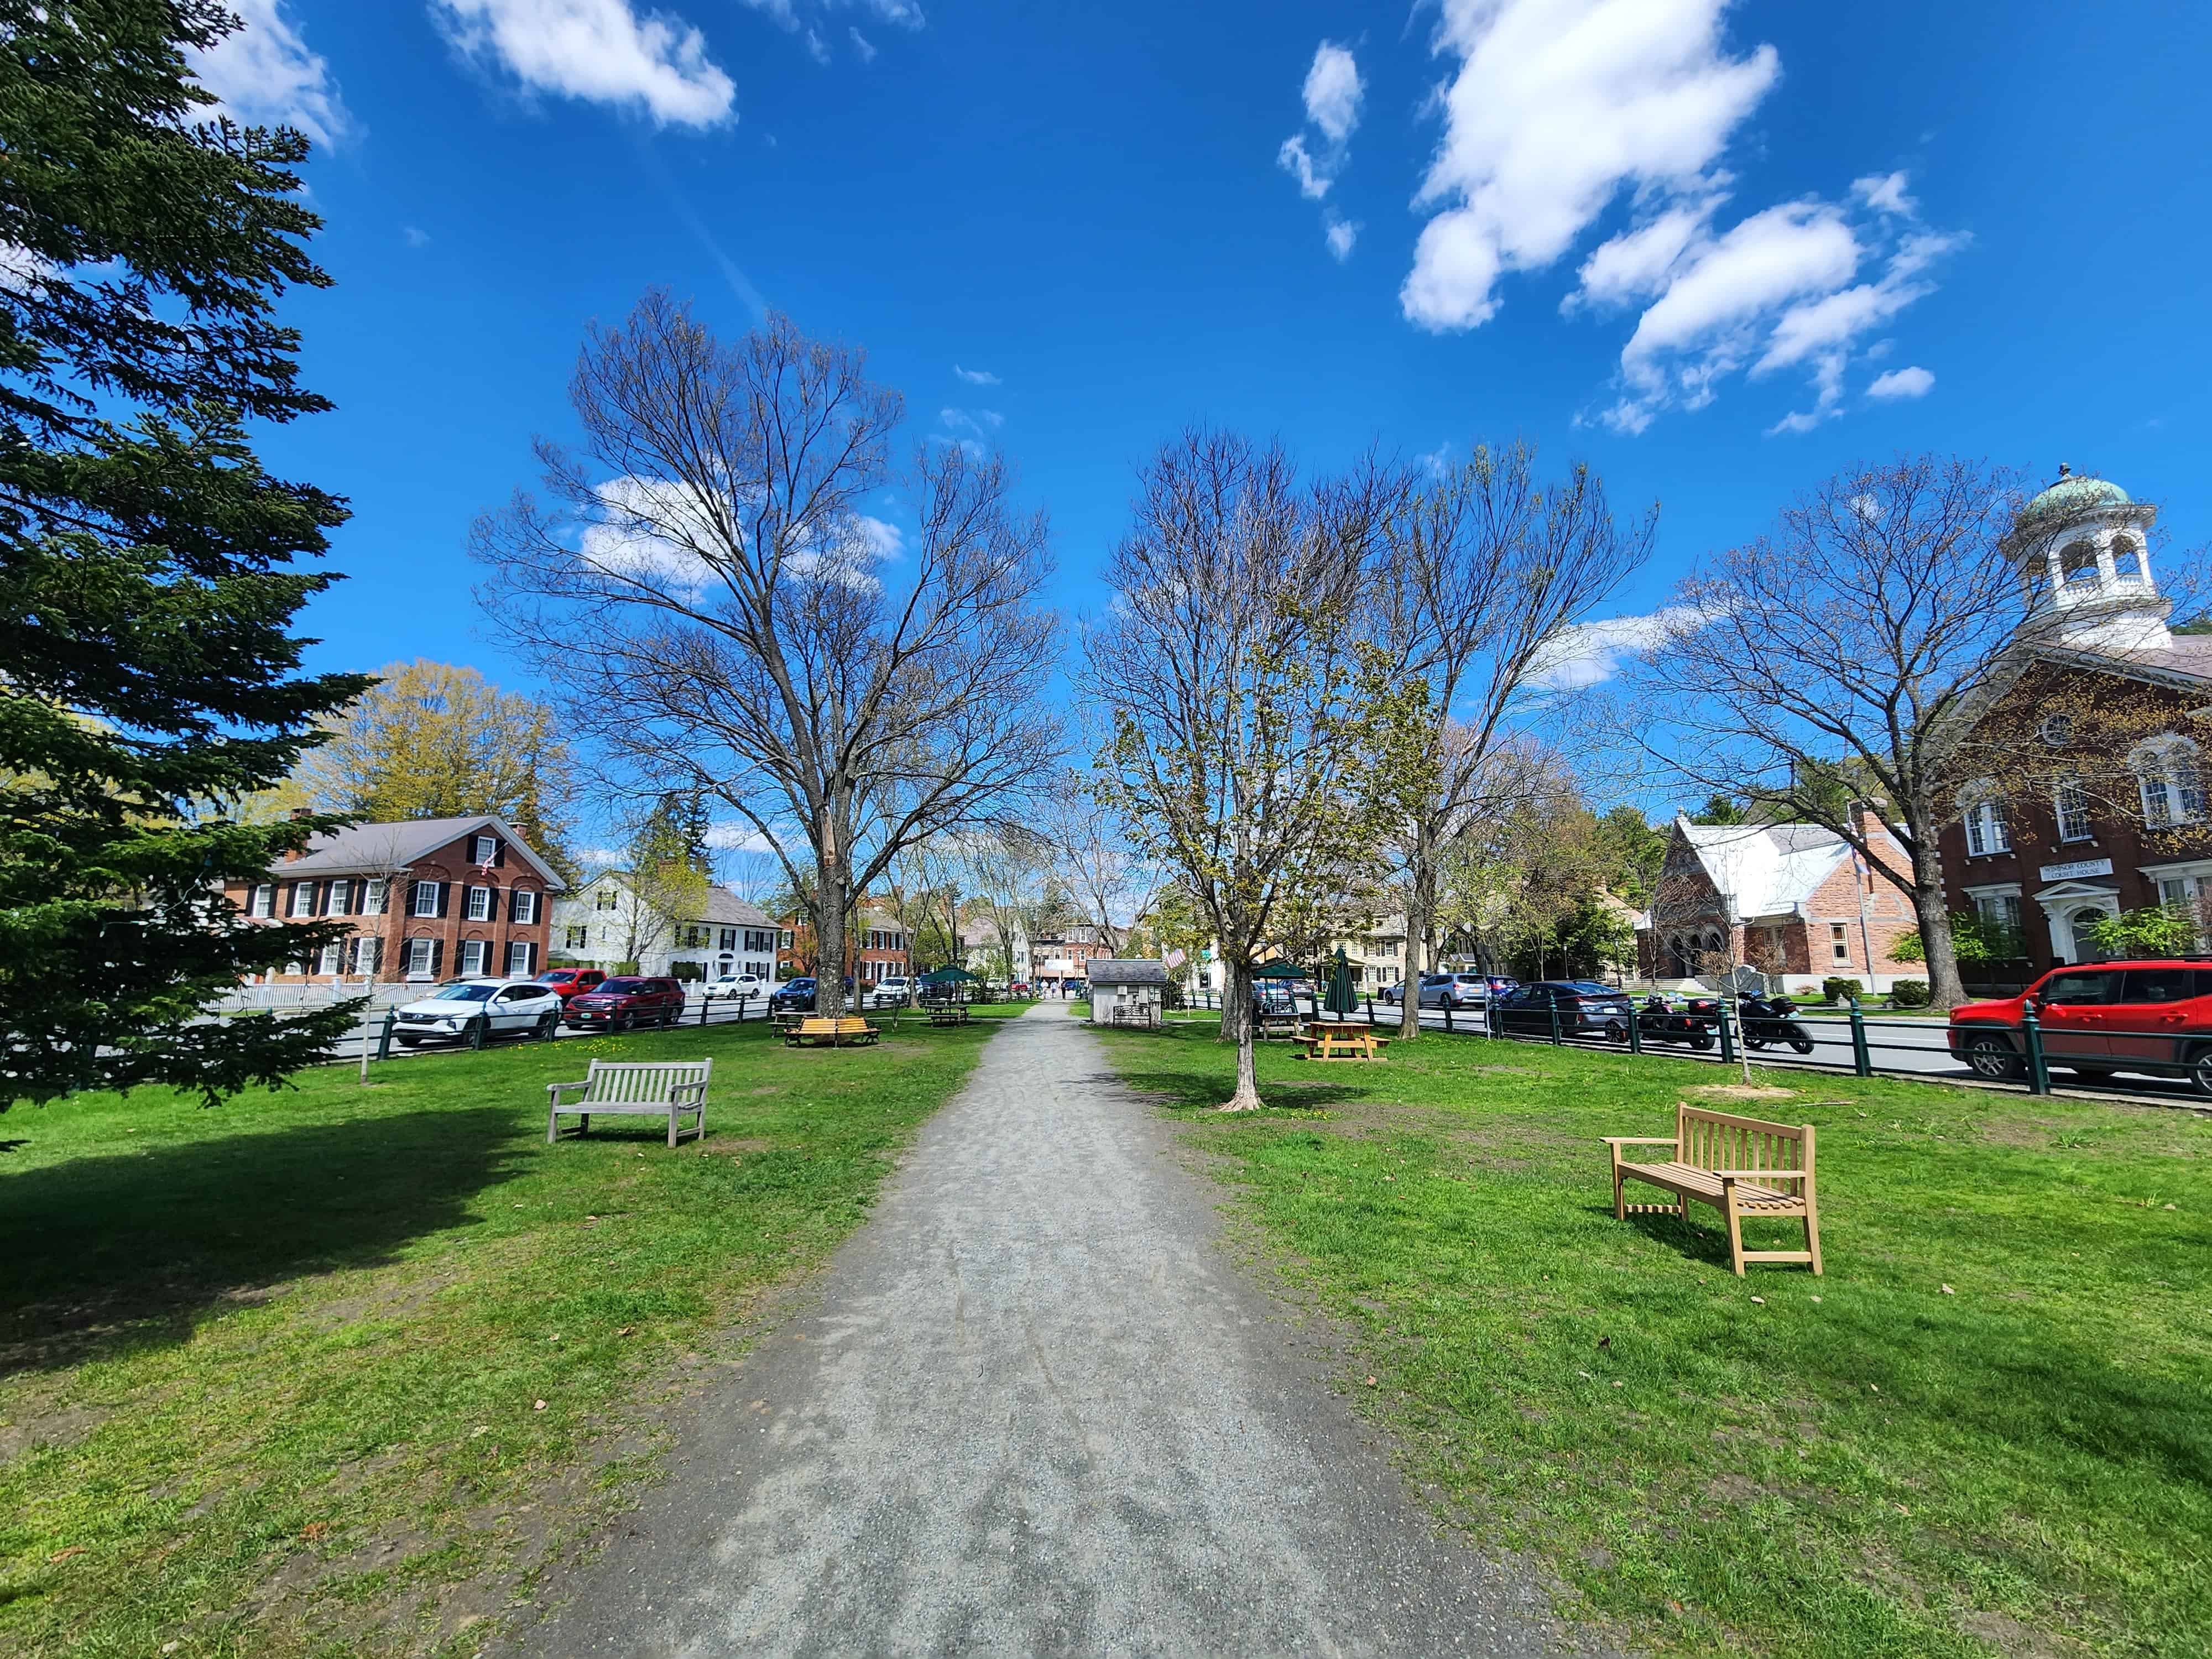 a rocky path runs through a village green in a charming Vermont town. the sky is blue, grass is green, and historic buildings line the roads